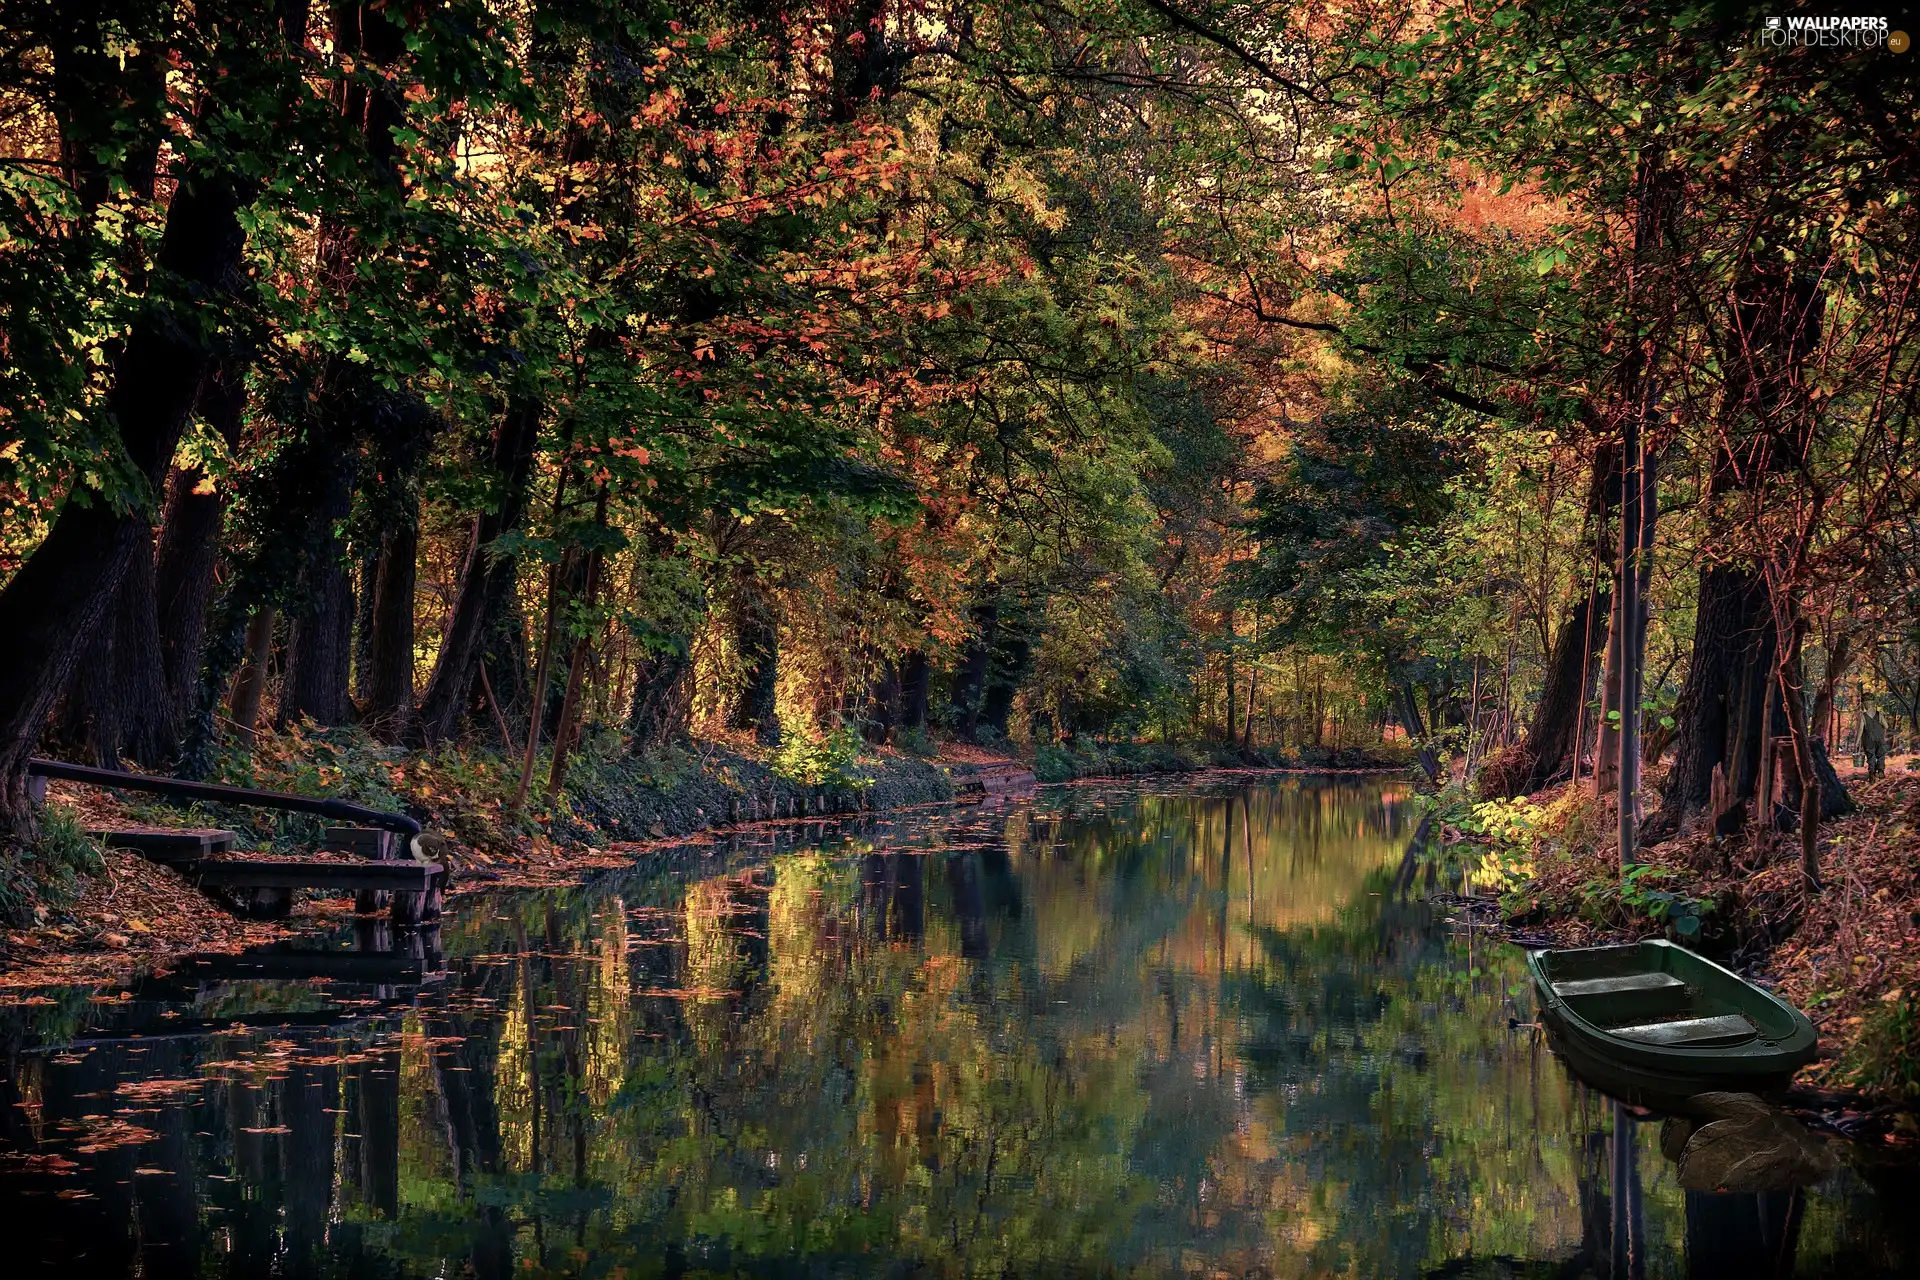 viewes, River, Boat, trees, canal, forest, autumn